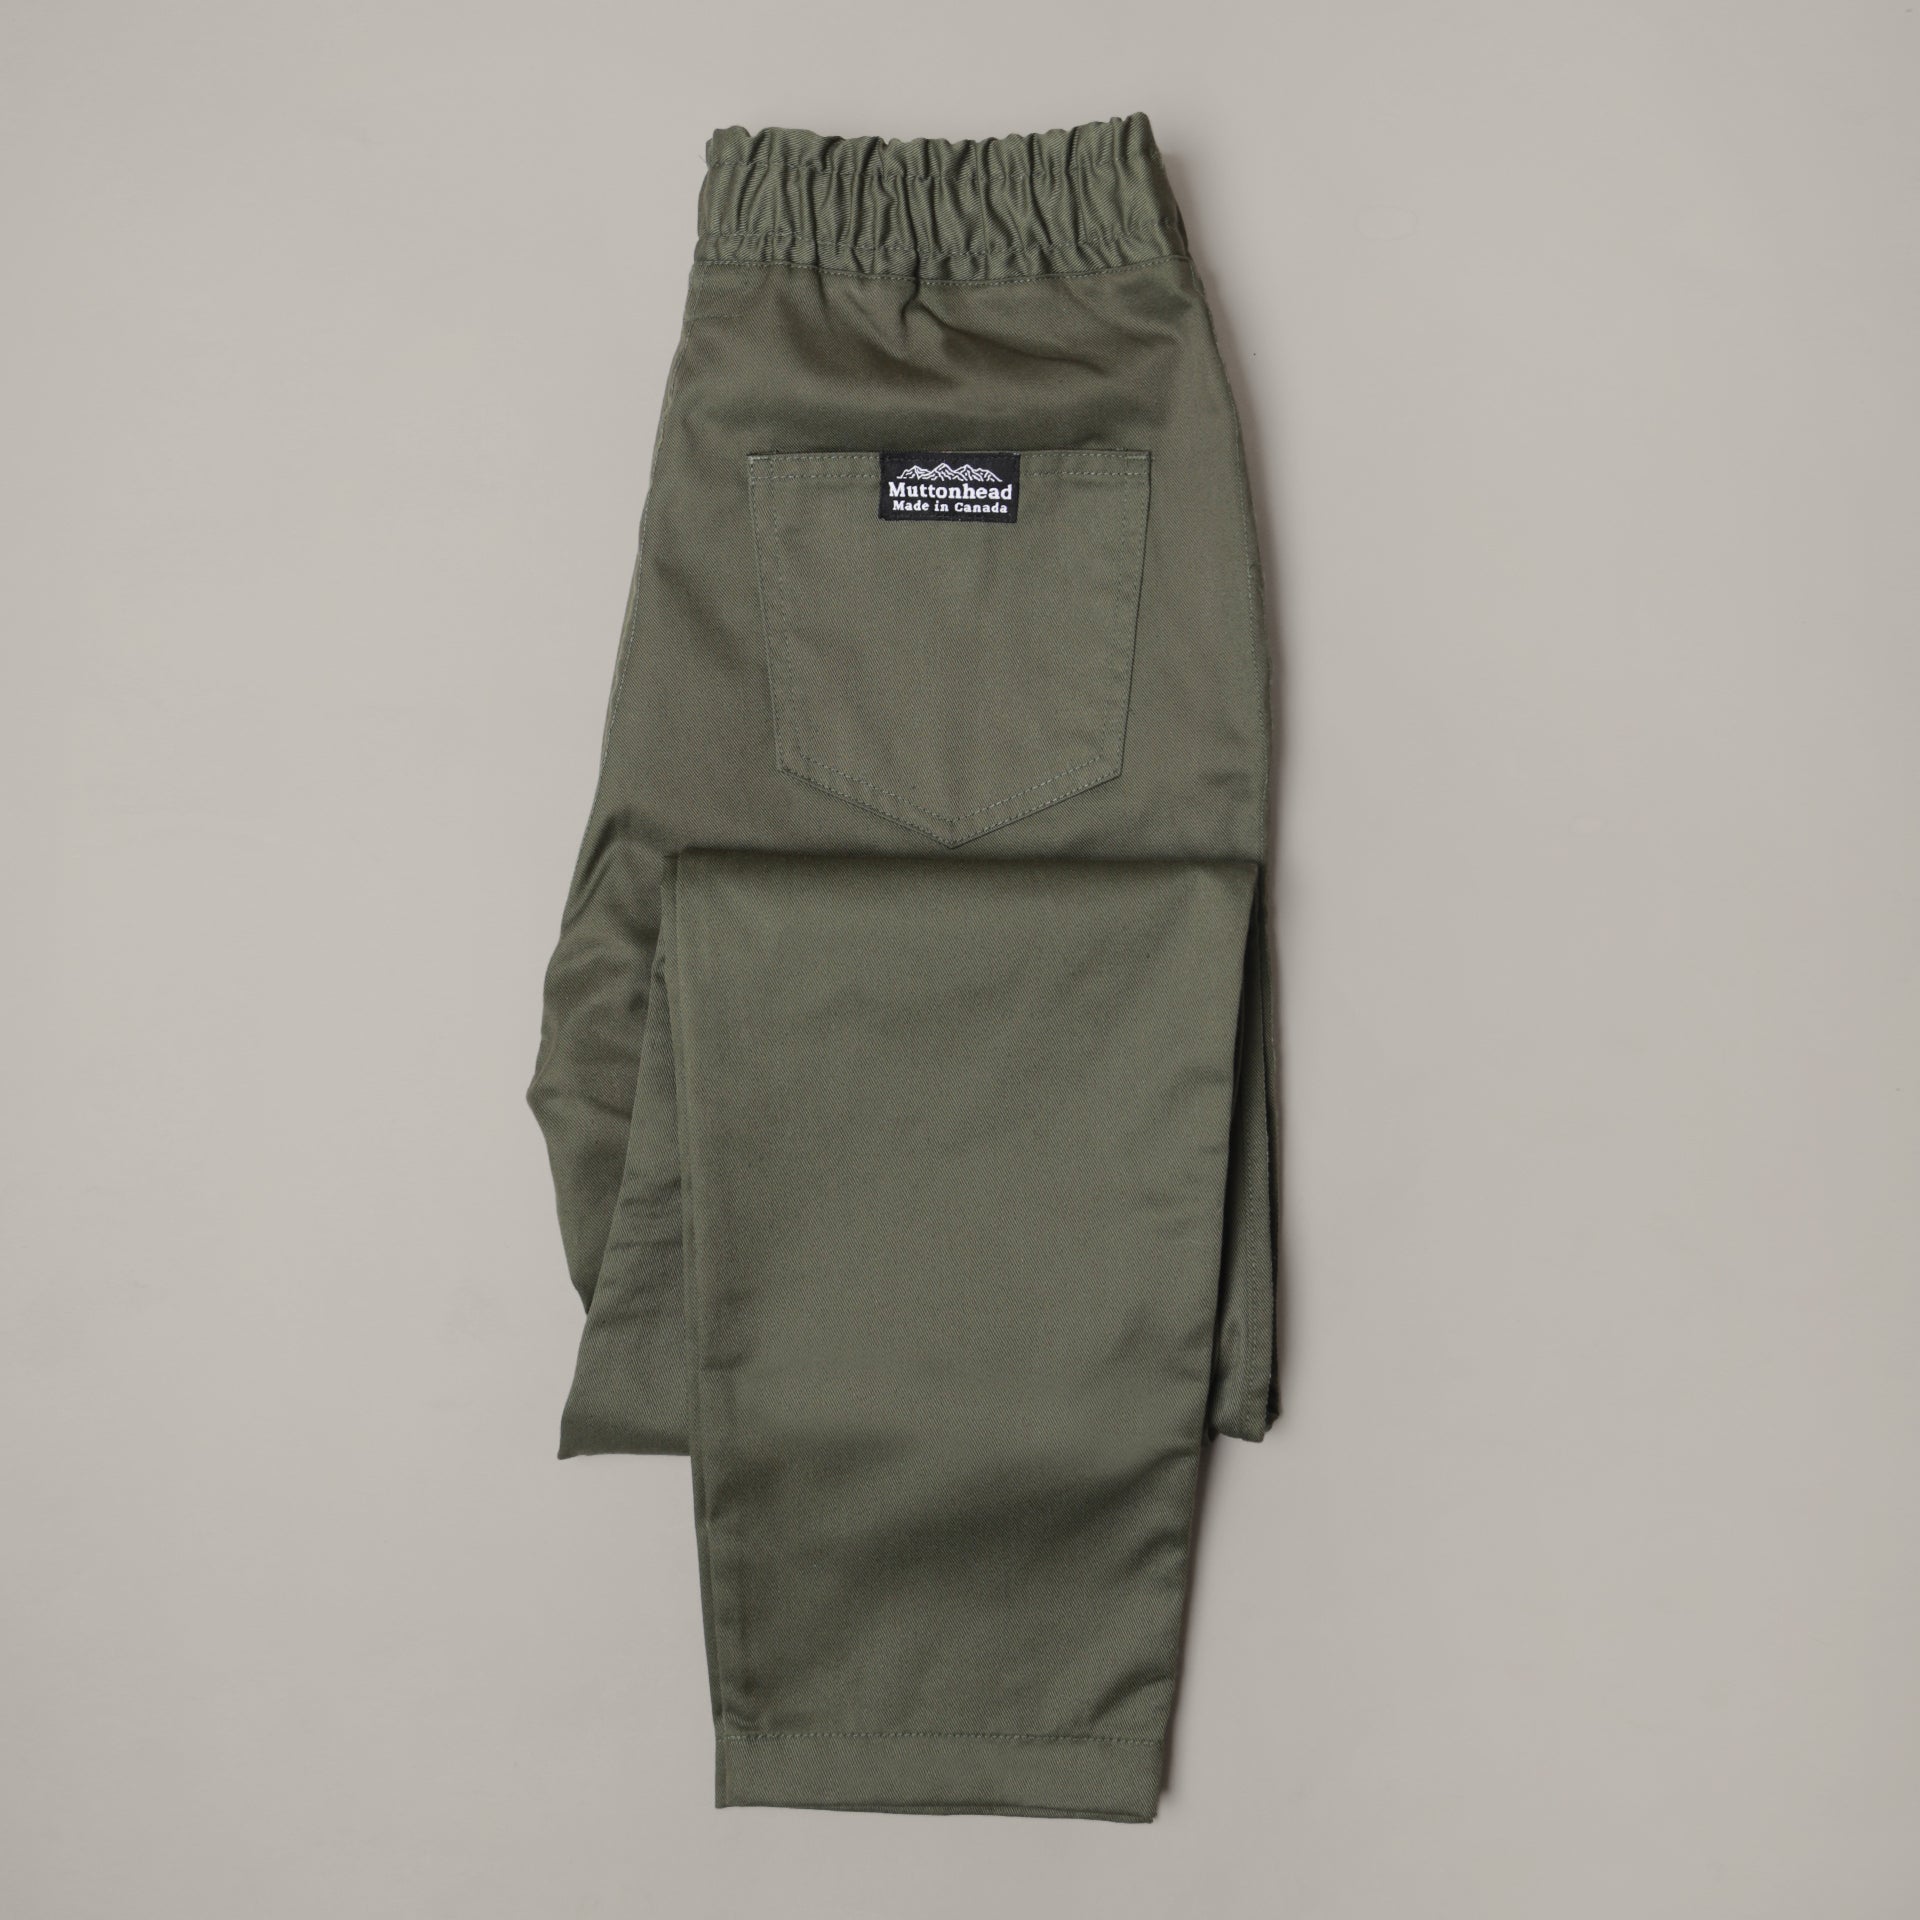 Easy Pant - Army